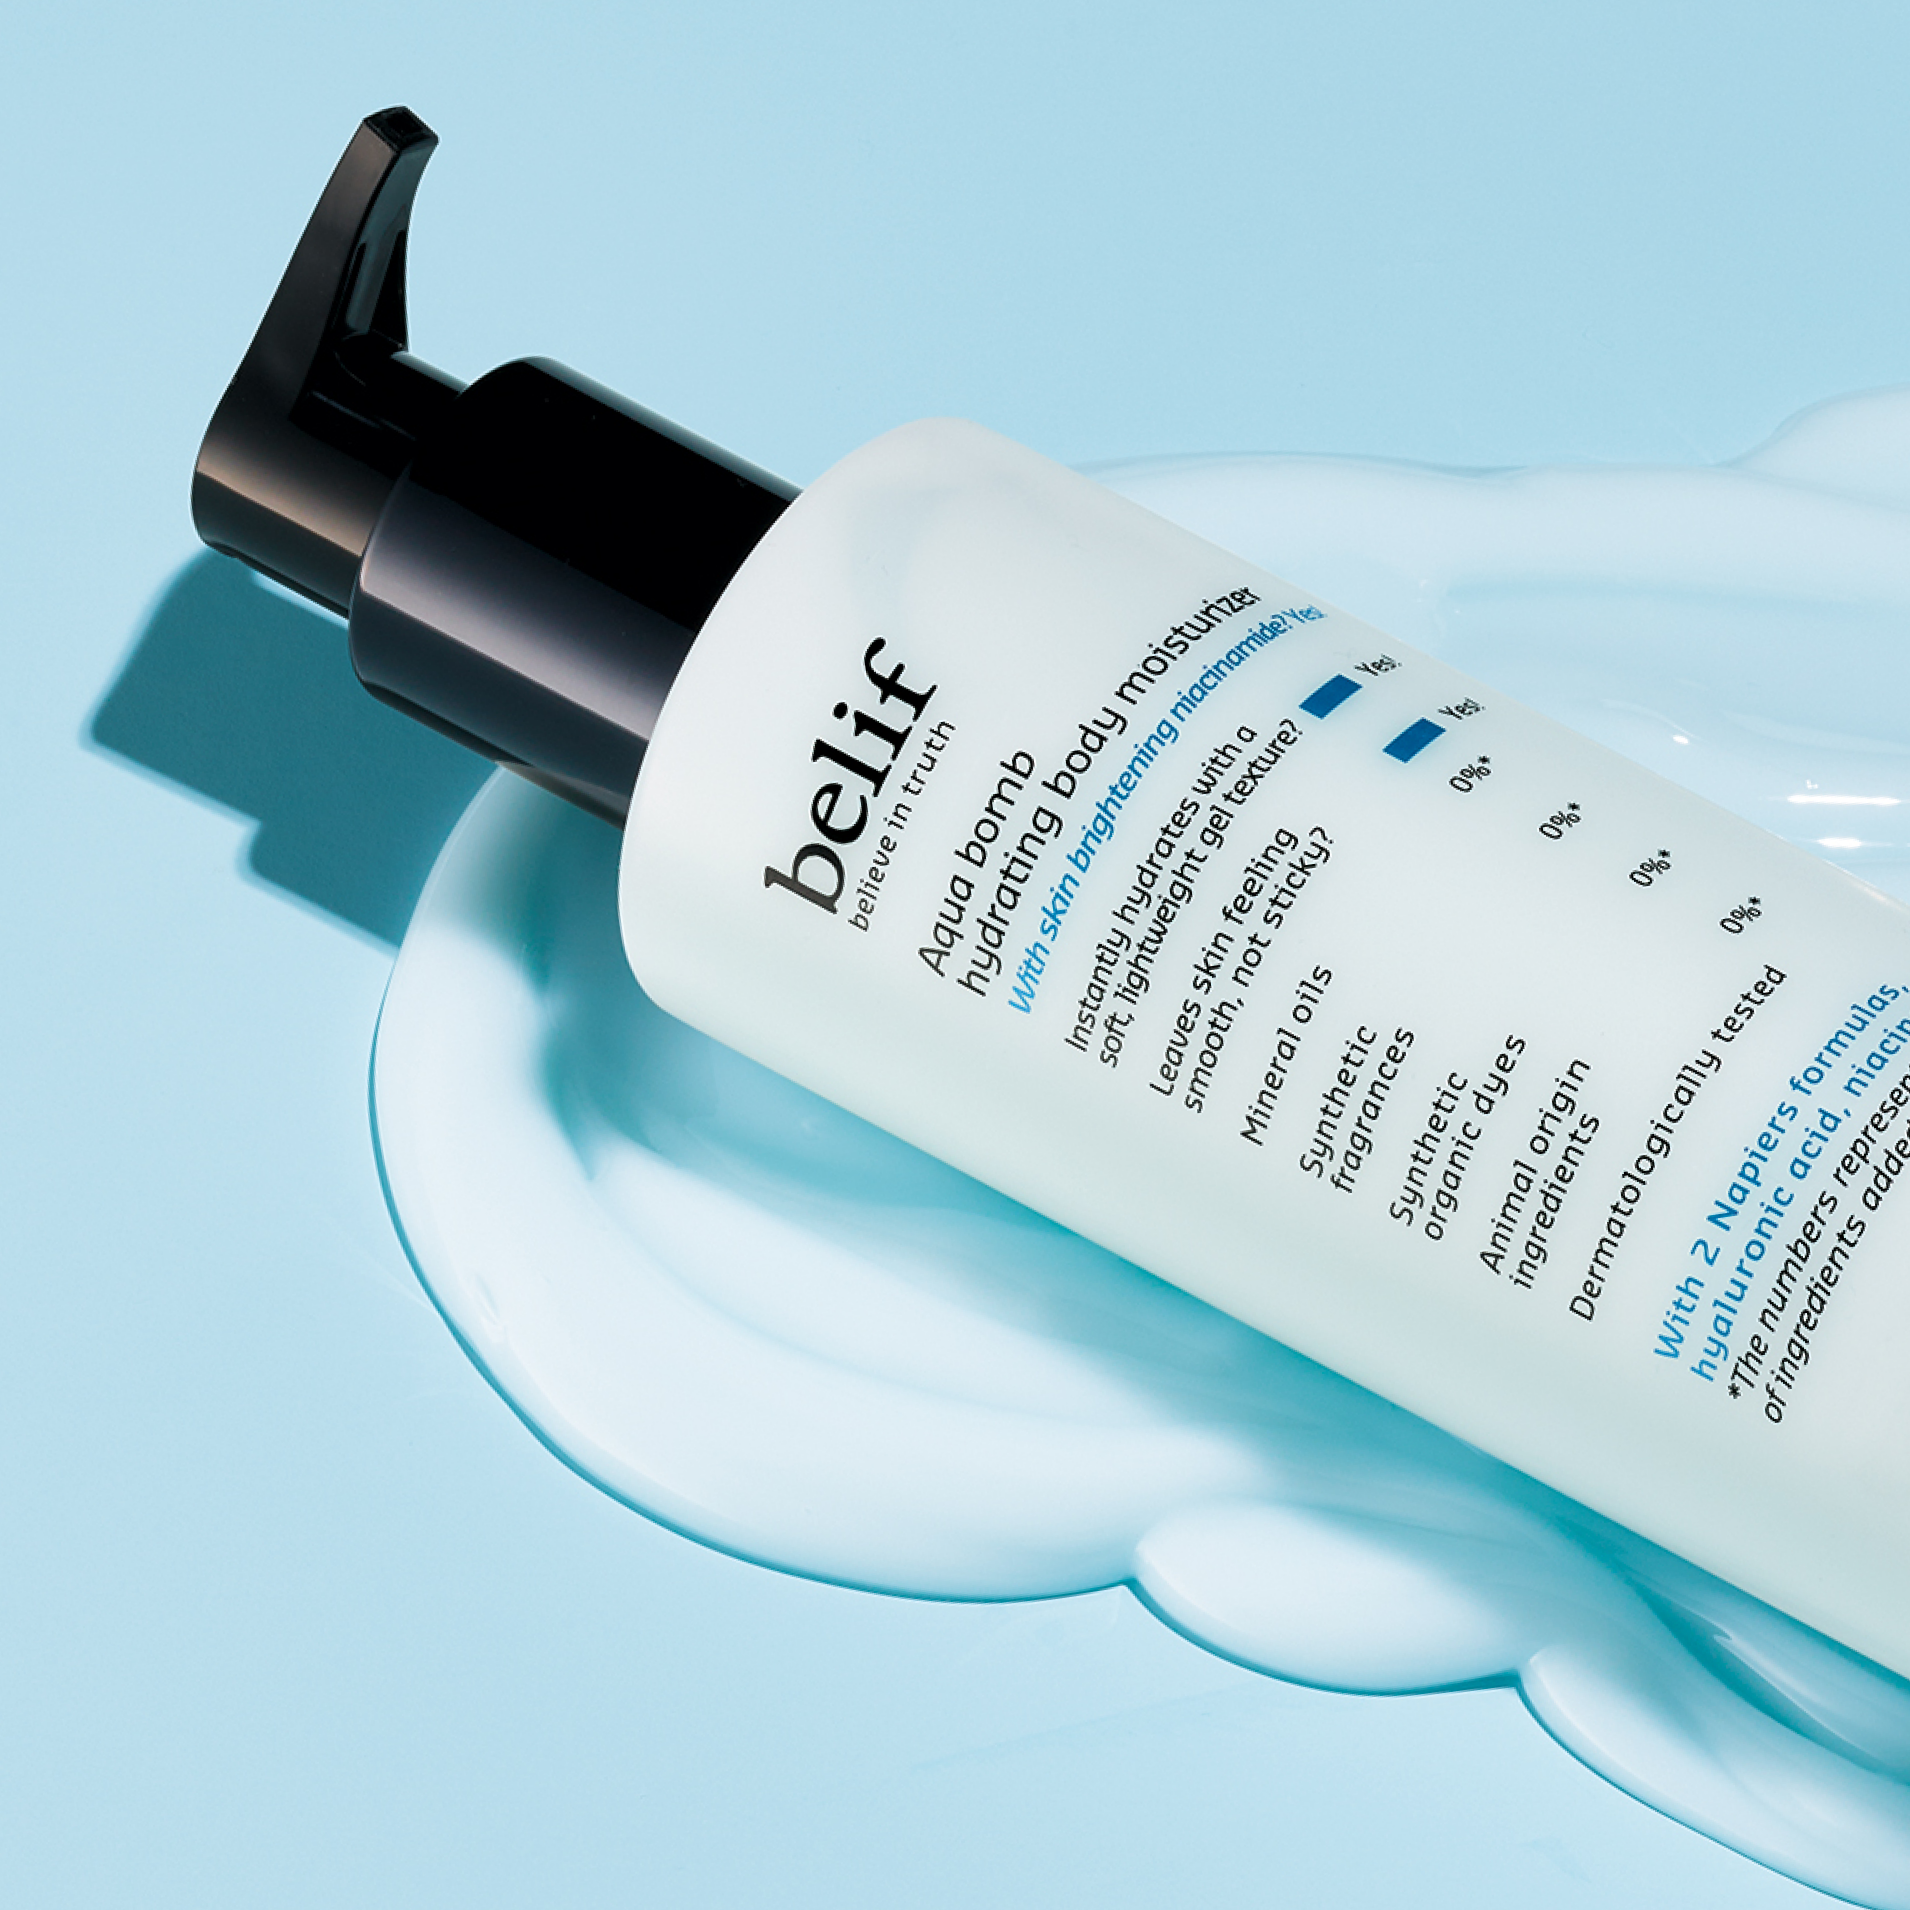 A white bottle of belif Aqua Bomb Hydrating Body Moisturizer lying in a puddle of the moisturizer on a light blue surface